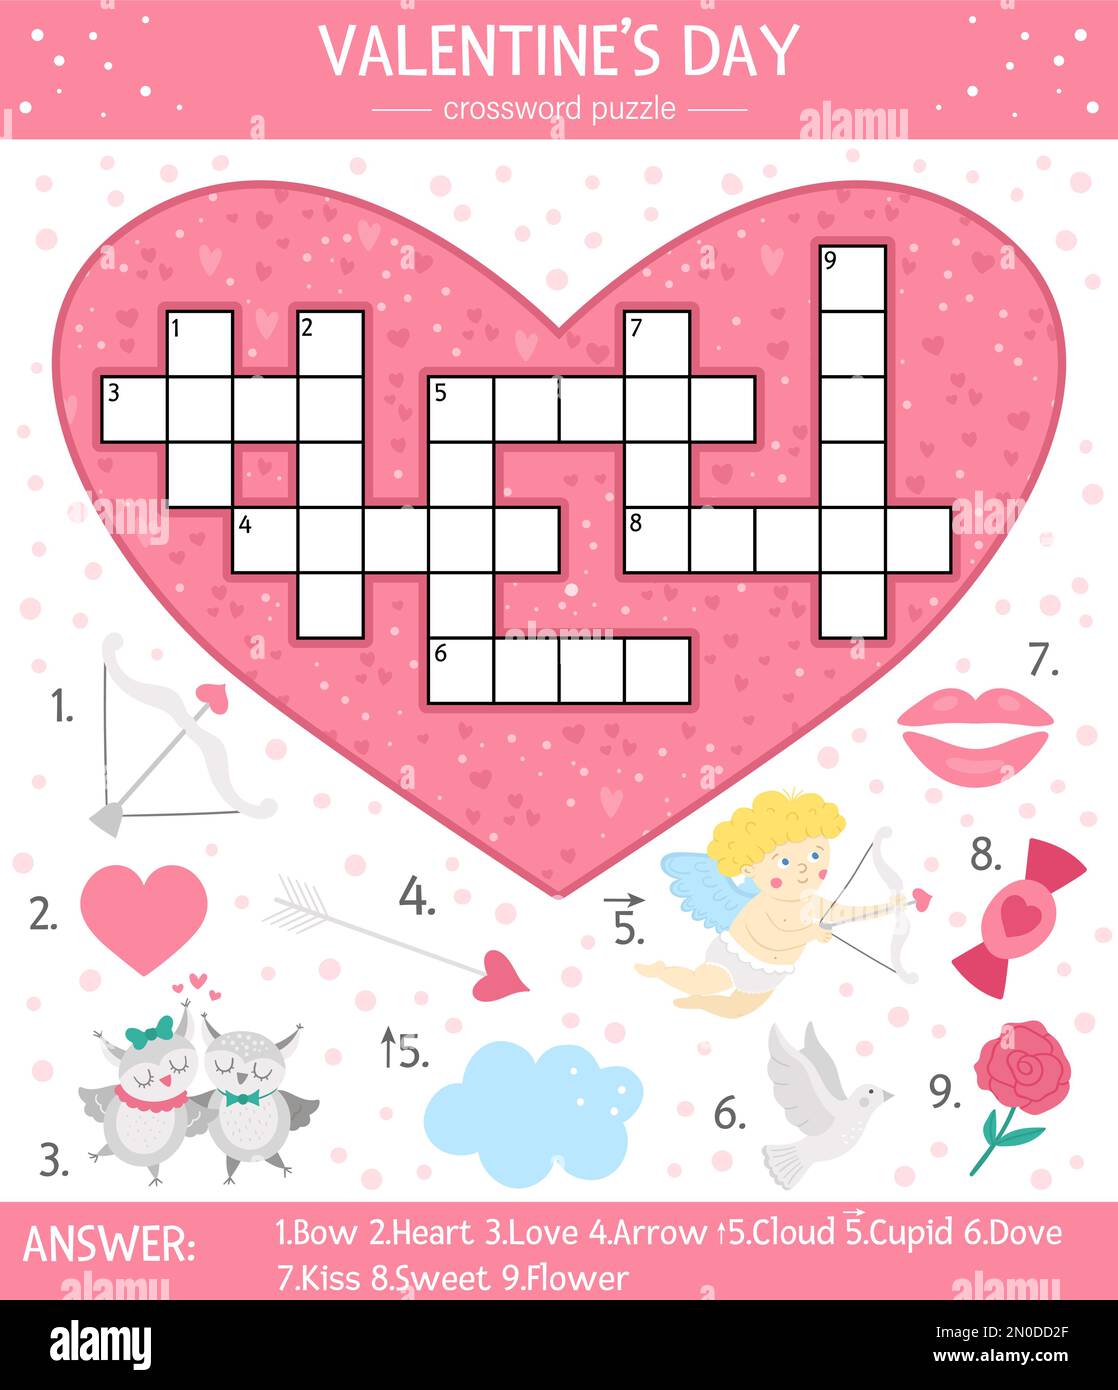 Vector Saint Valentine day crossword puzzle for kids. Simple heart shaped quiz with holiday objects and animals for children. Educational activity wit Stock Vector